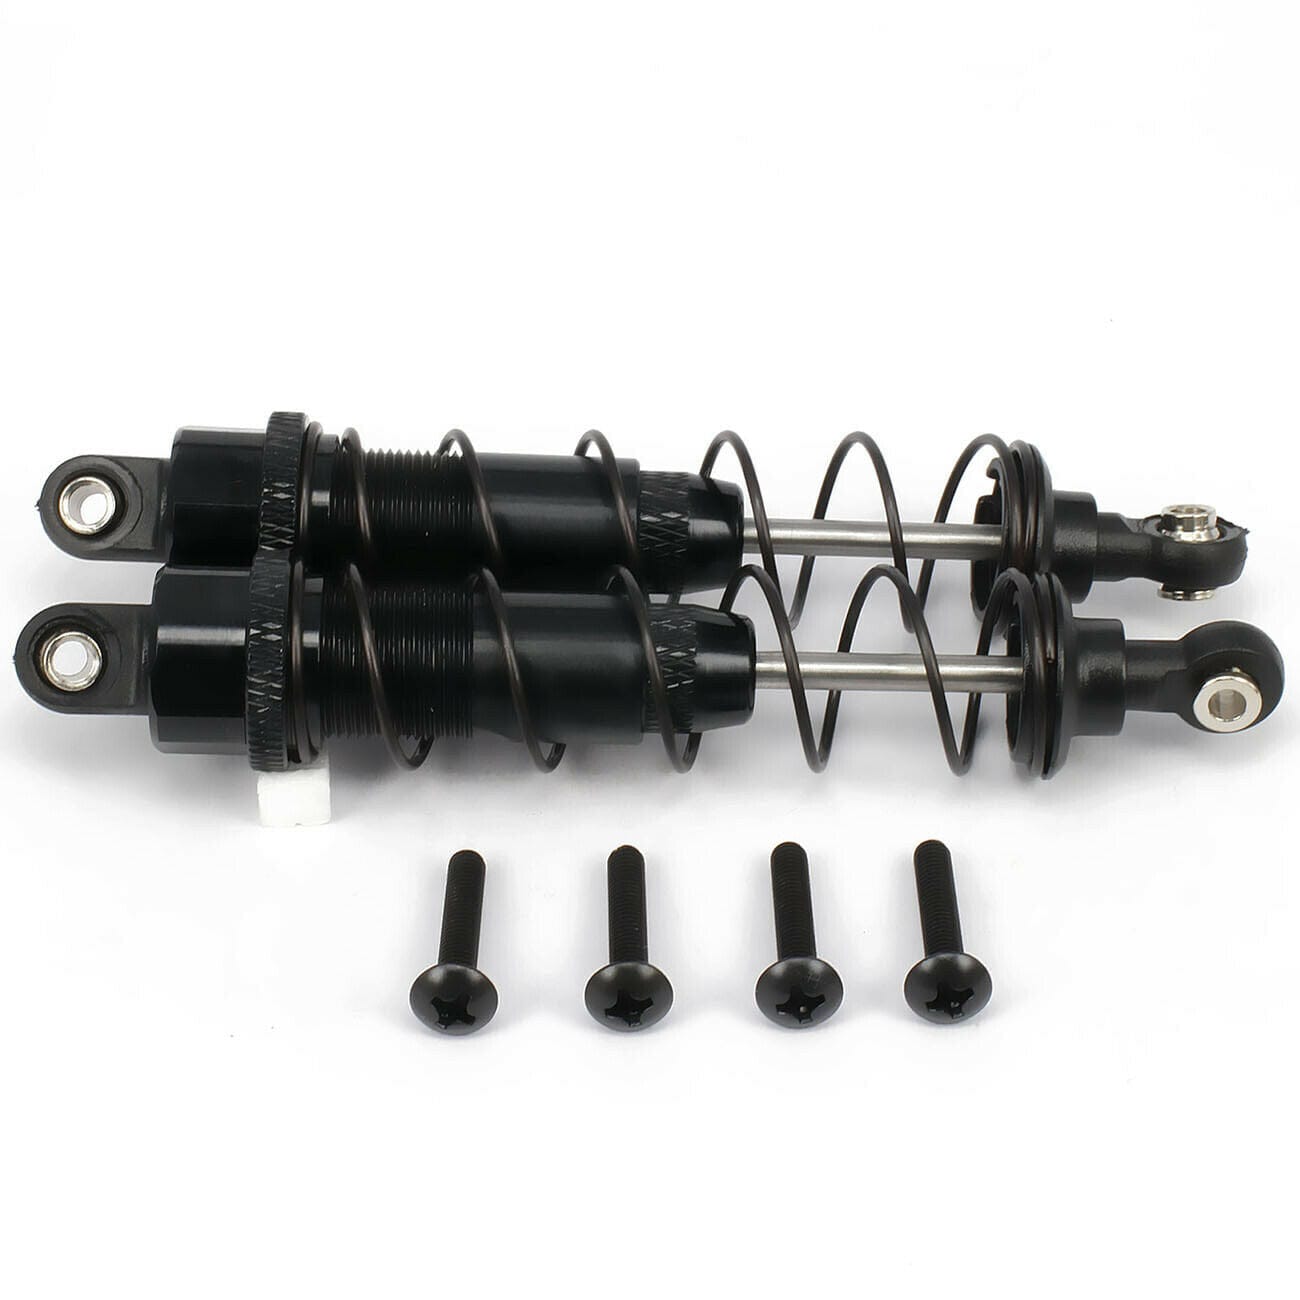 RCAWD AXIAL UPGRADE PARTS Black 100mm RC Shock Absorber Damper For Rc Model Car 1/10 Axial Scx10